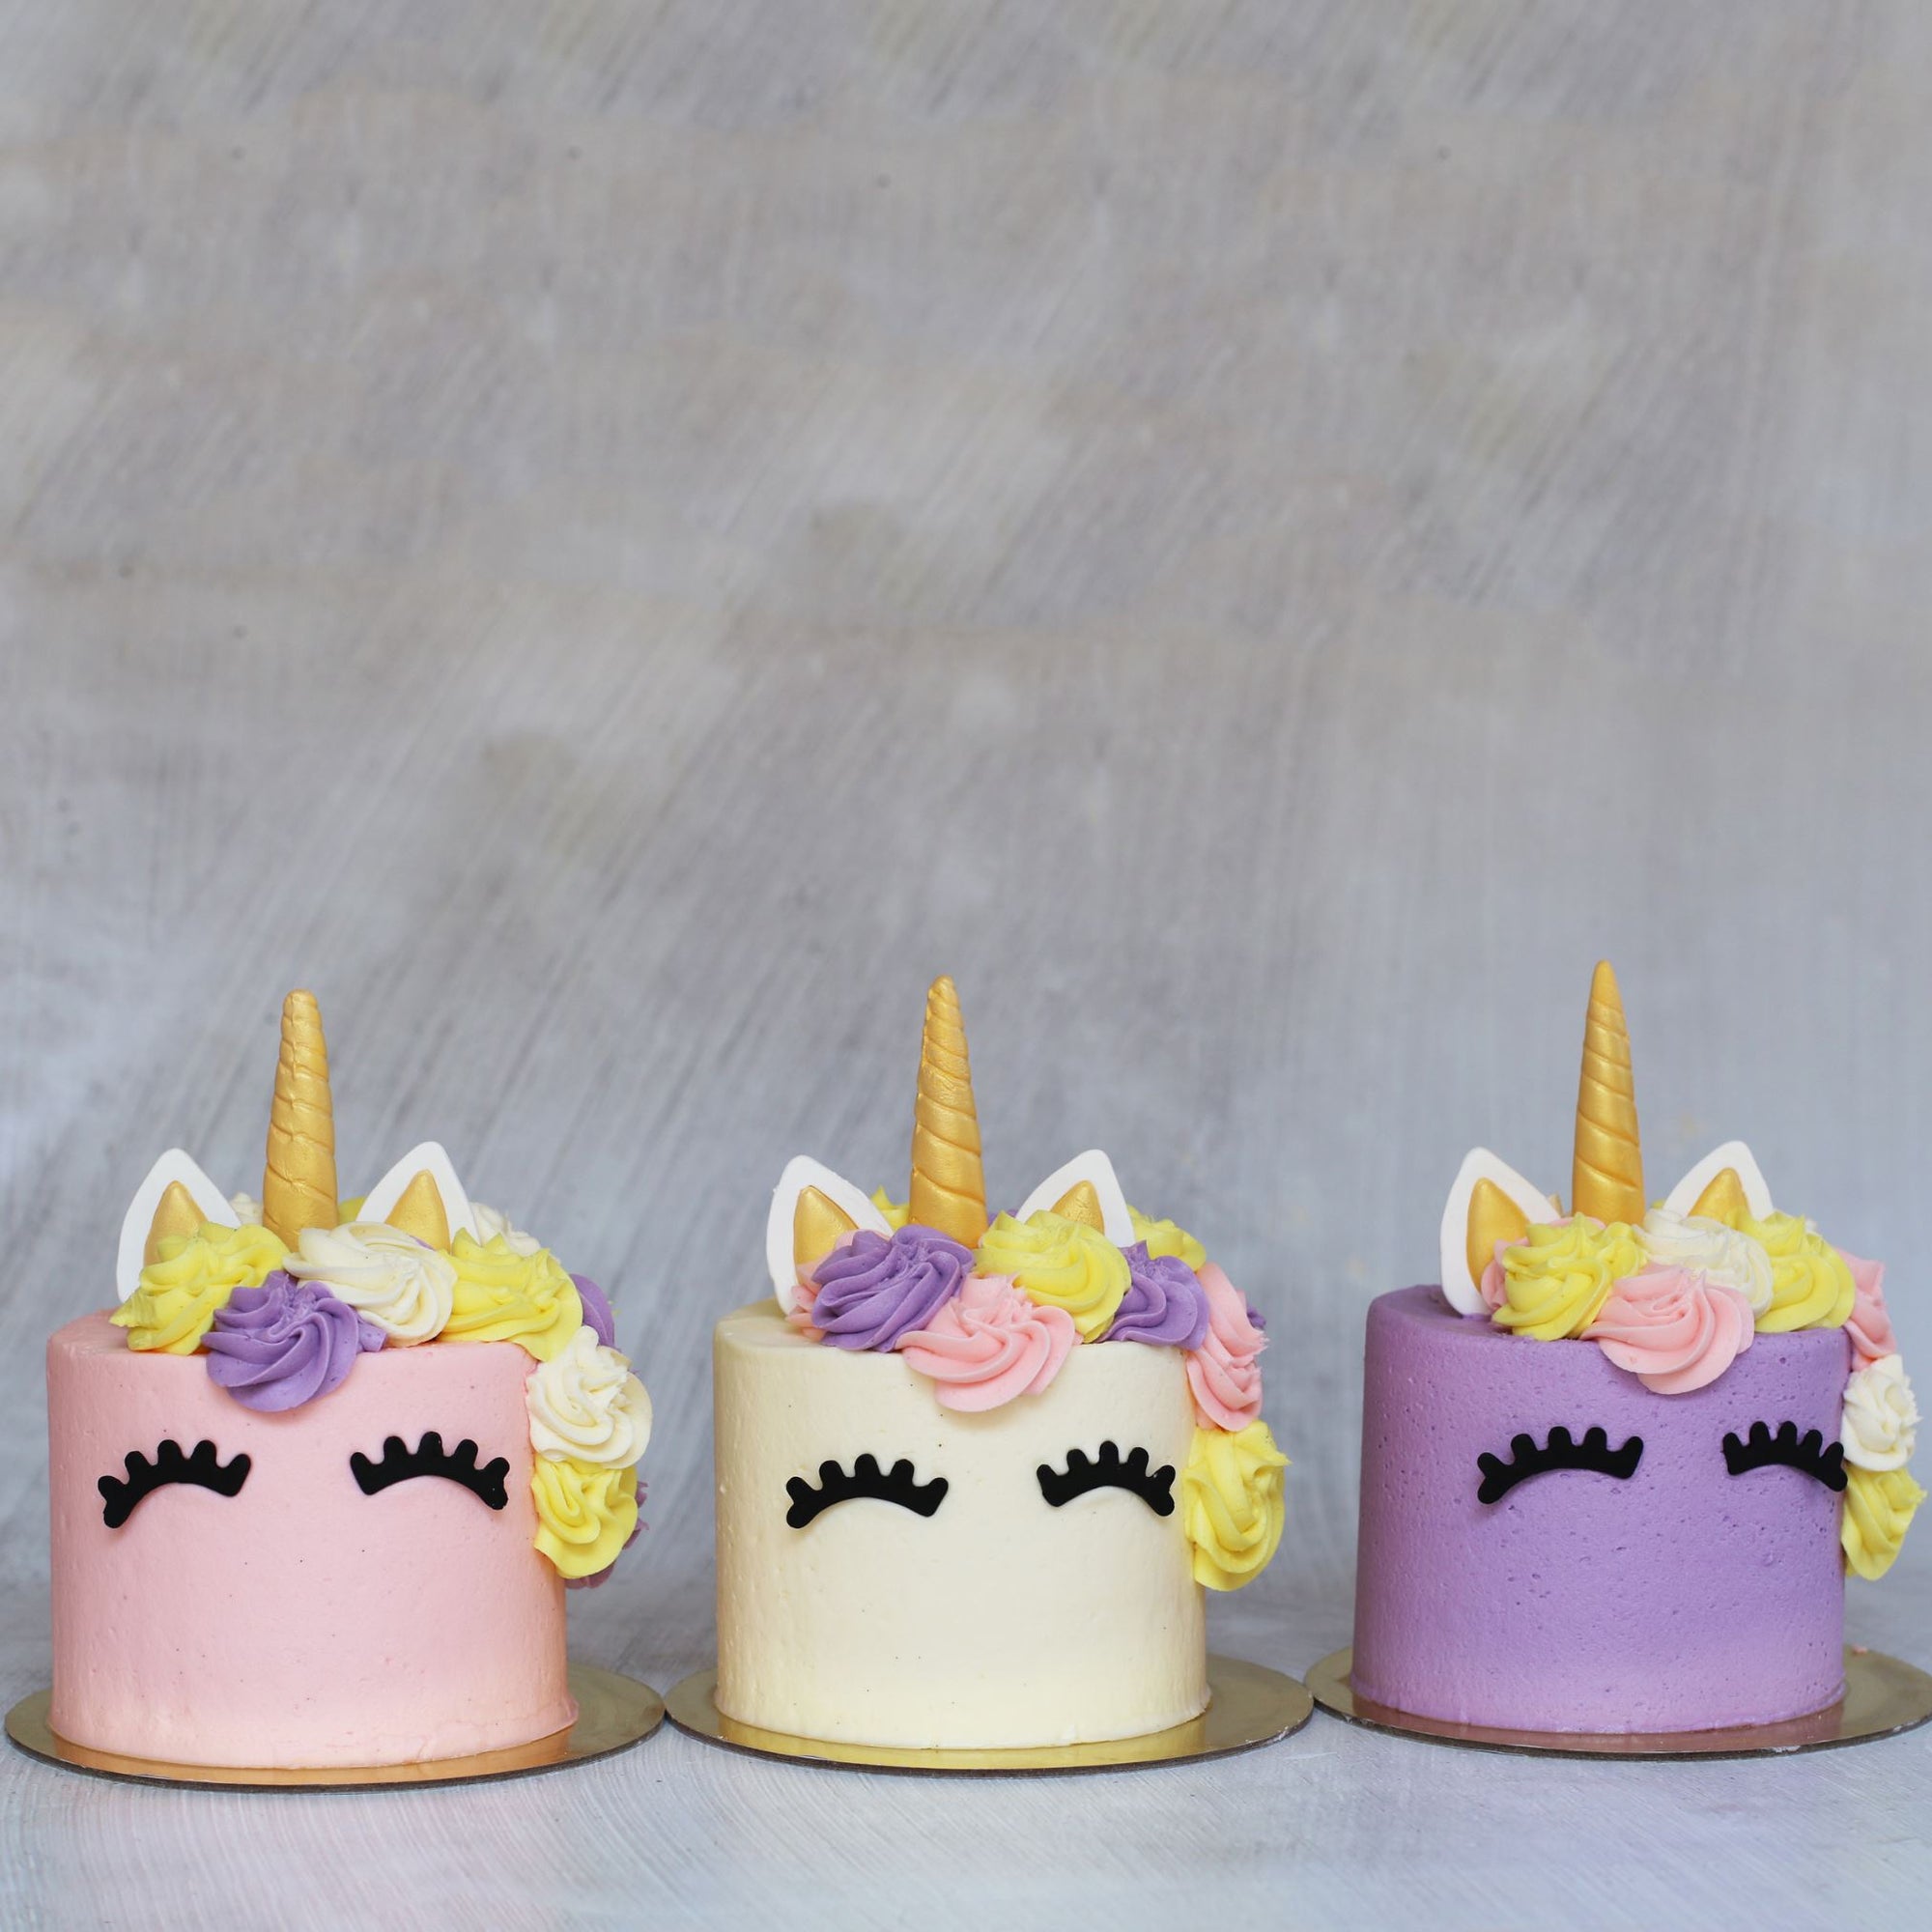 The Unicorn Cake in Pink Cakes The Cupcake Queens 